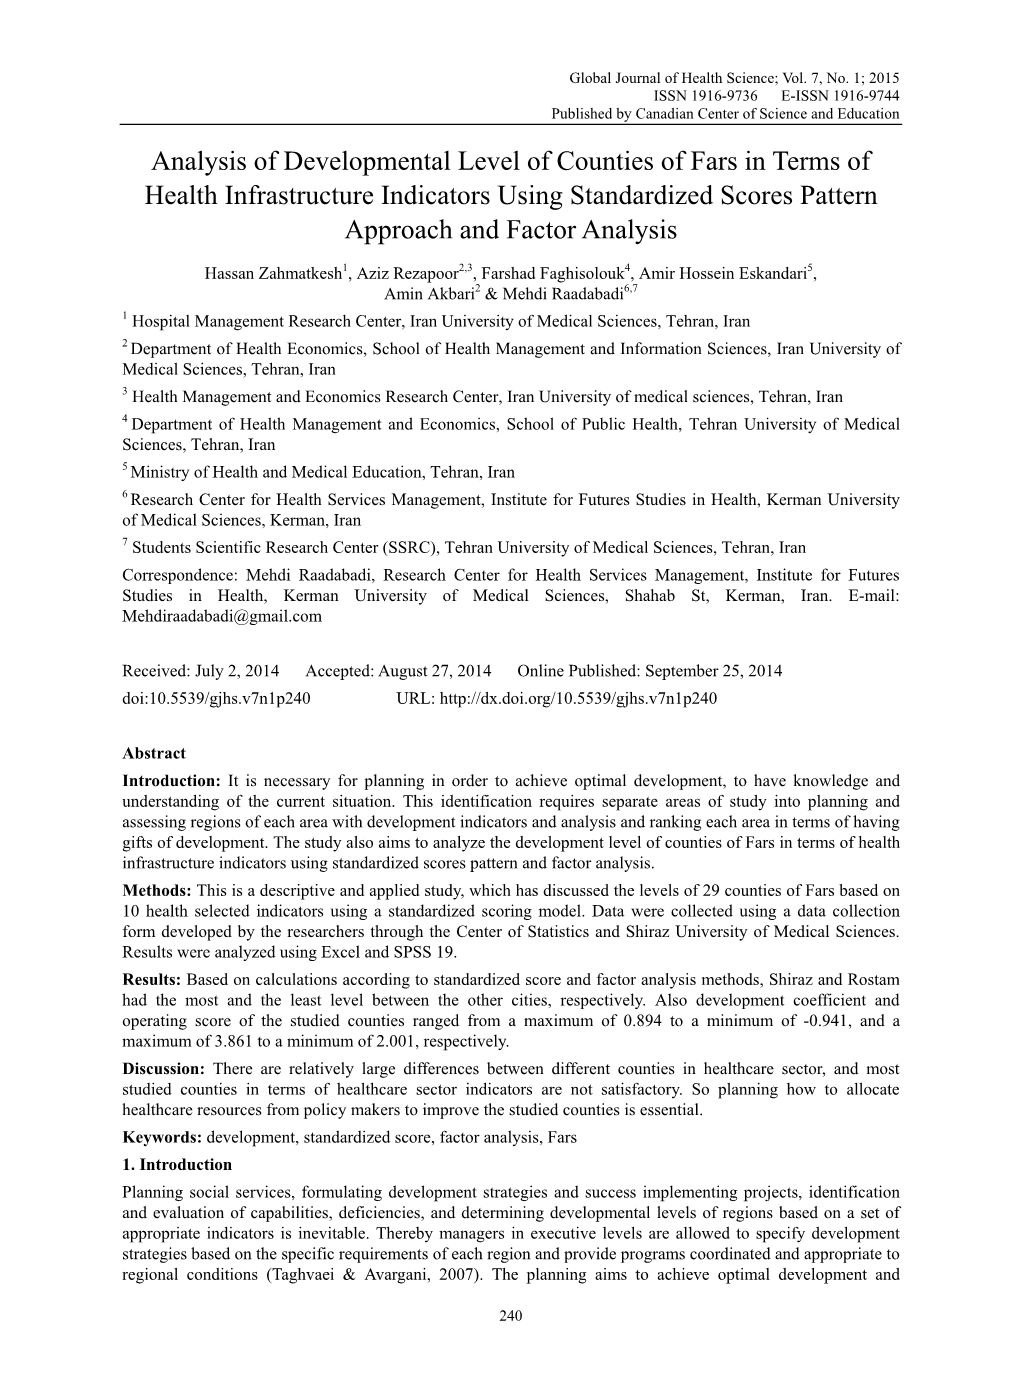 Analysis of Developmental Level of Counties of Fars in Terms of Health Infrastructure Indicators Using Standardized Scores Pattern Approach and Factor Analysis